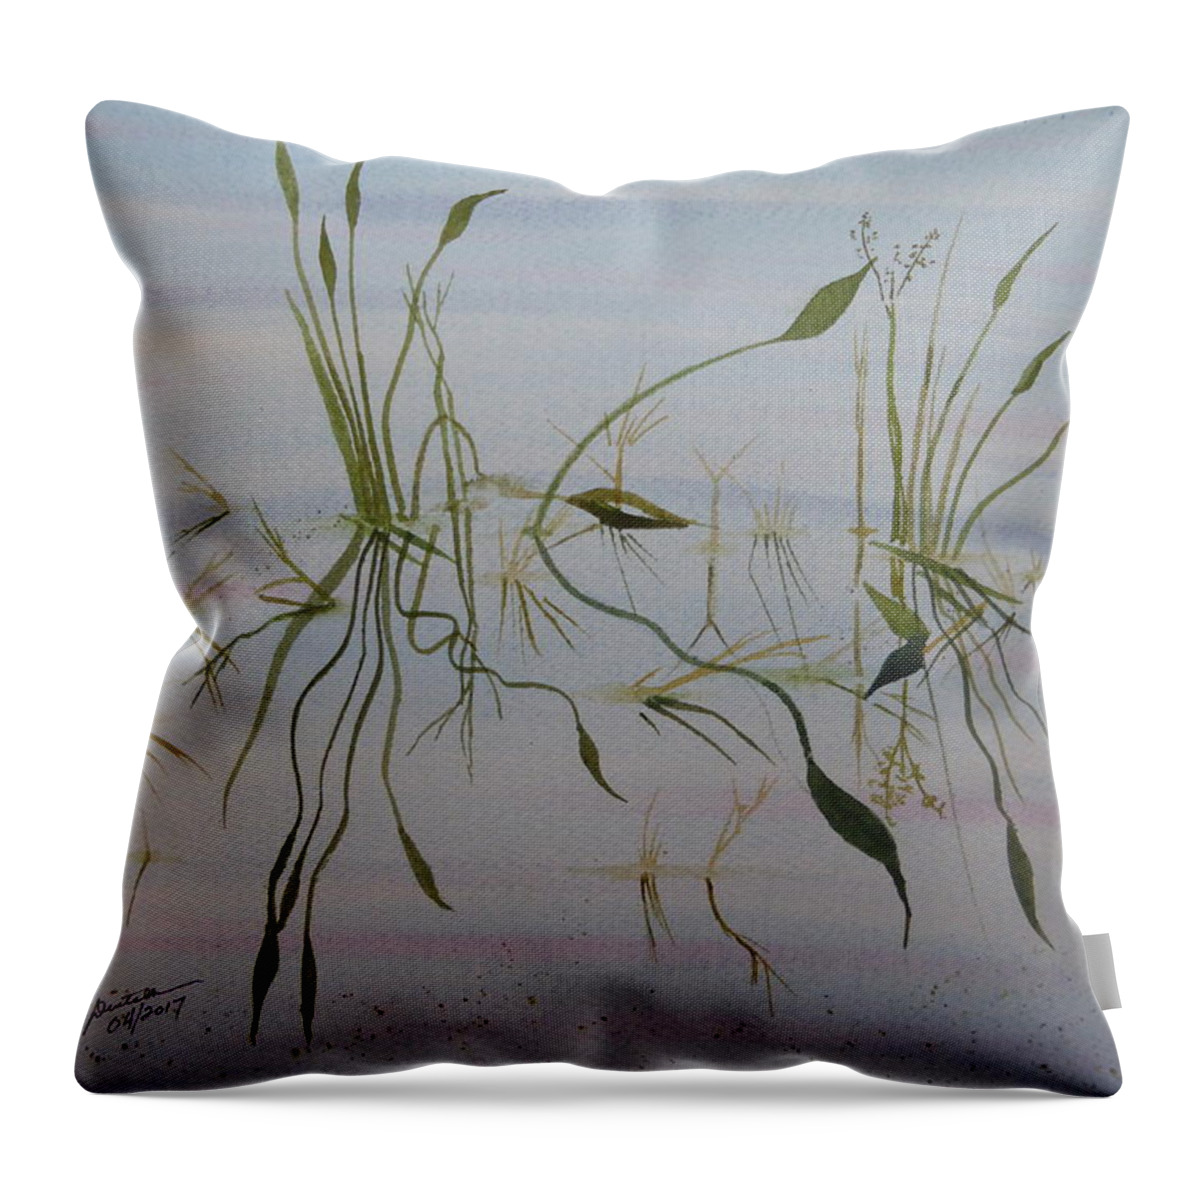 Lake Grass Throw Pillow featuring the painting Water Music by Joel Deutsch